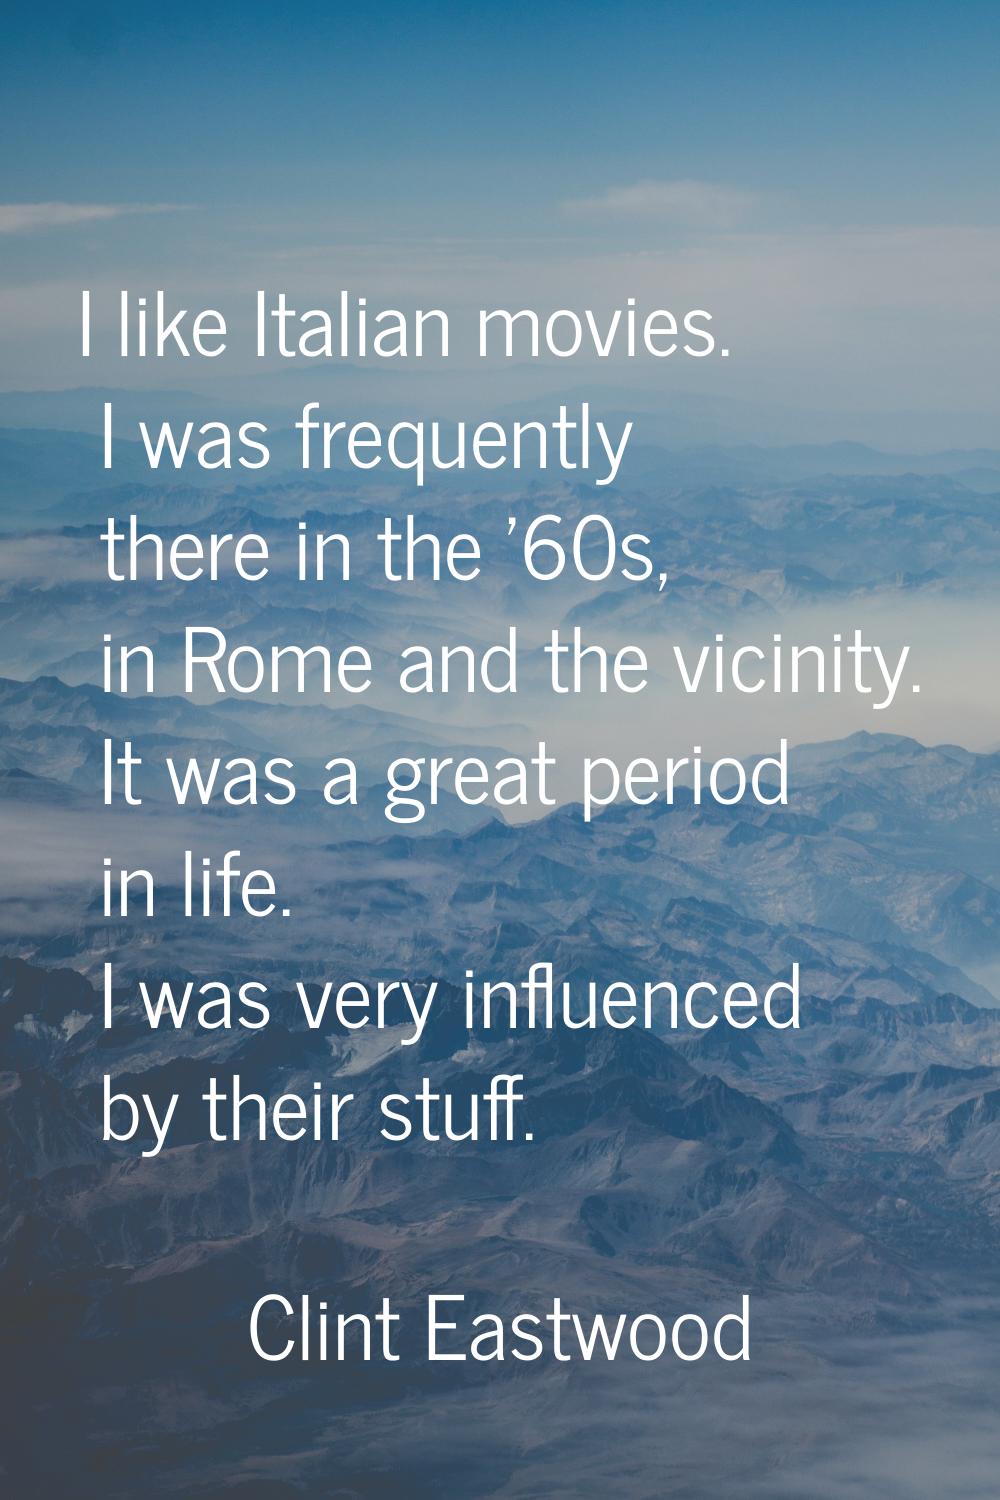 I like Italian movies. I was frequently there in the '60s, in Rome and the vicinity. It was a great